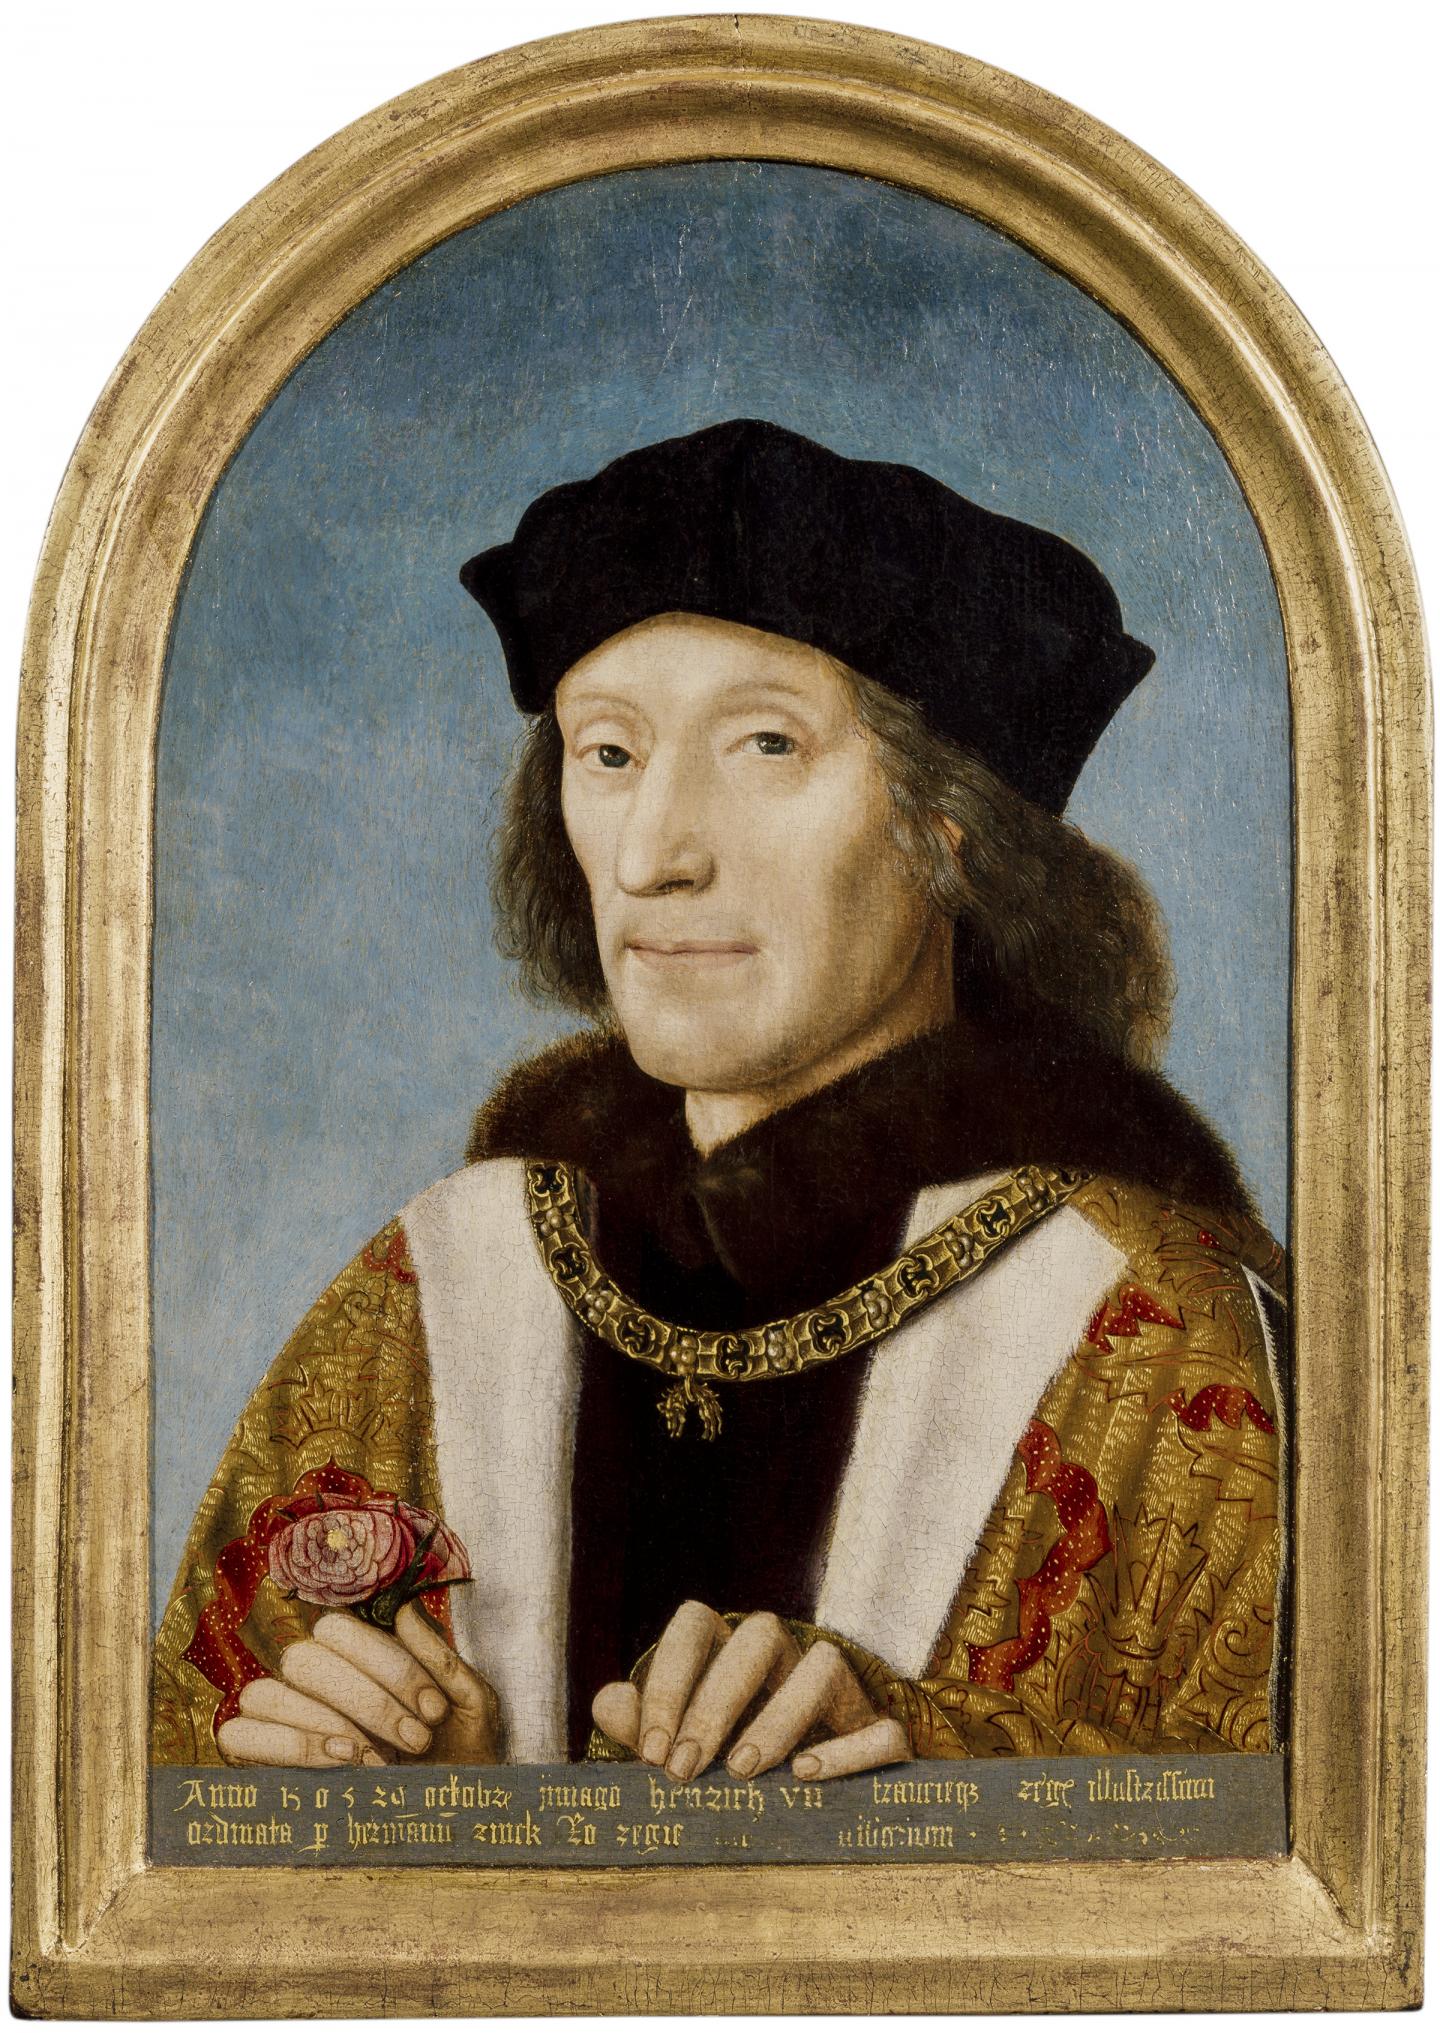 Henry VII wears a gold robe with a gold chain